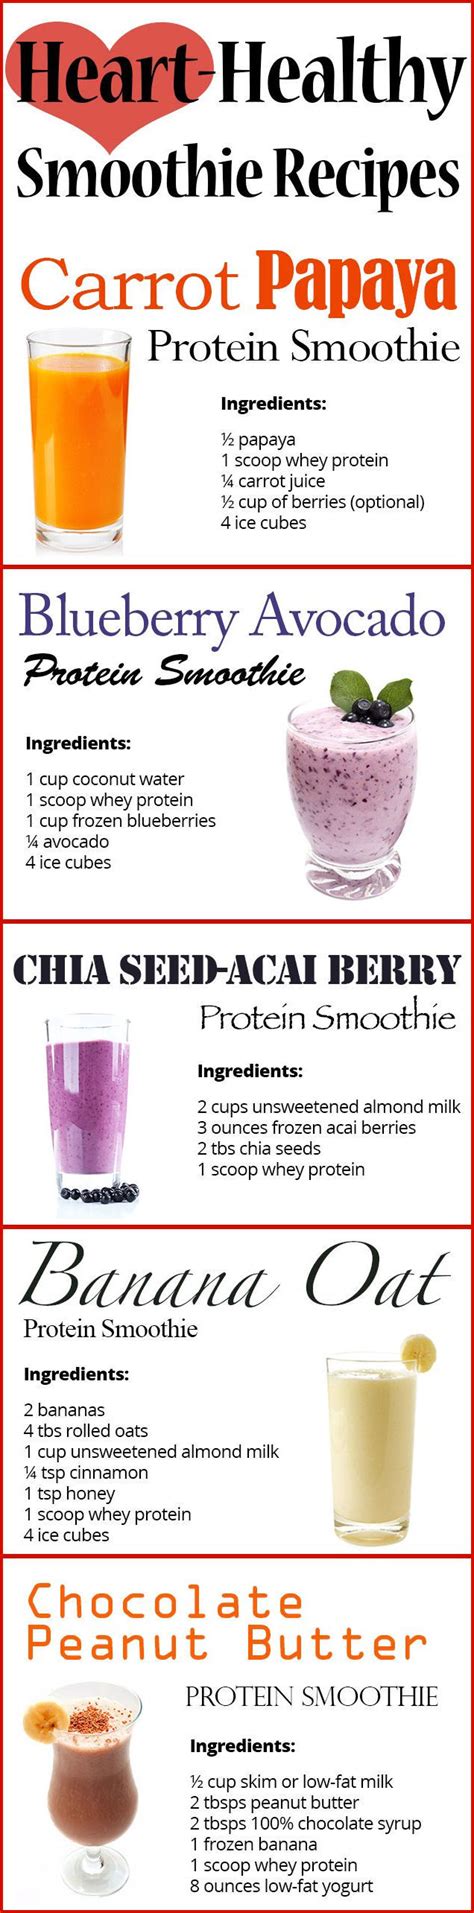 Heart Healthy Smoothie Recipes Pictures, Photos, and ...